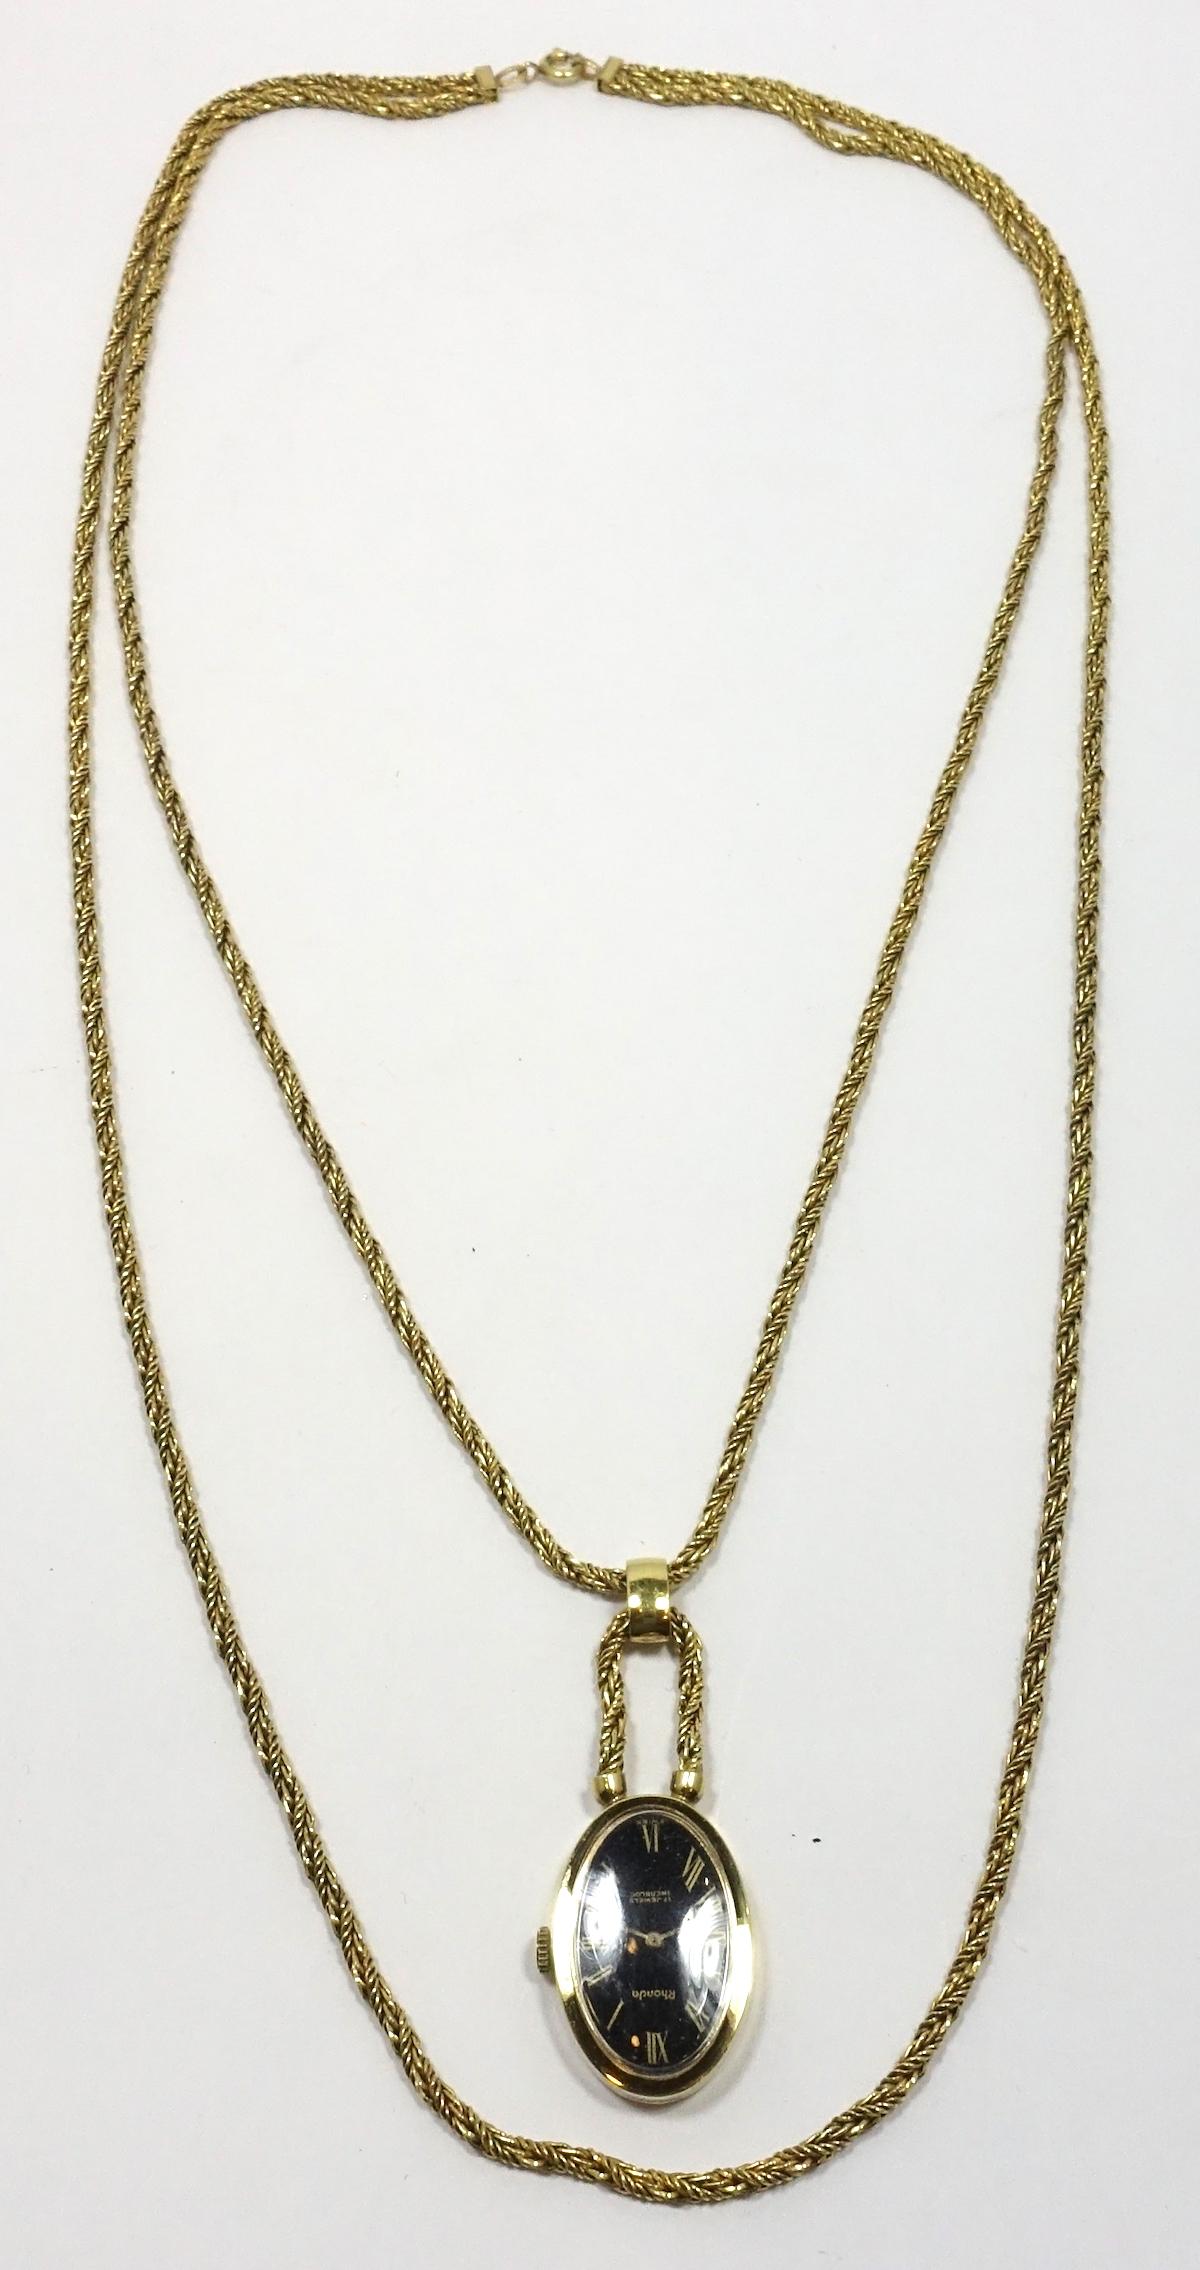 This vintage necklace has two chains with a working 17 Jewel watch pendant hanging from the first chain. It is in a gold tone setting. The inside chain measures 25”; the watch is 1-1/8” x 7/8”.   It is signed “Ronda” and this watch pendant necklace